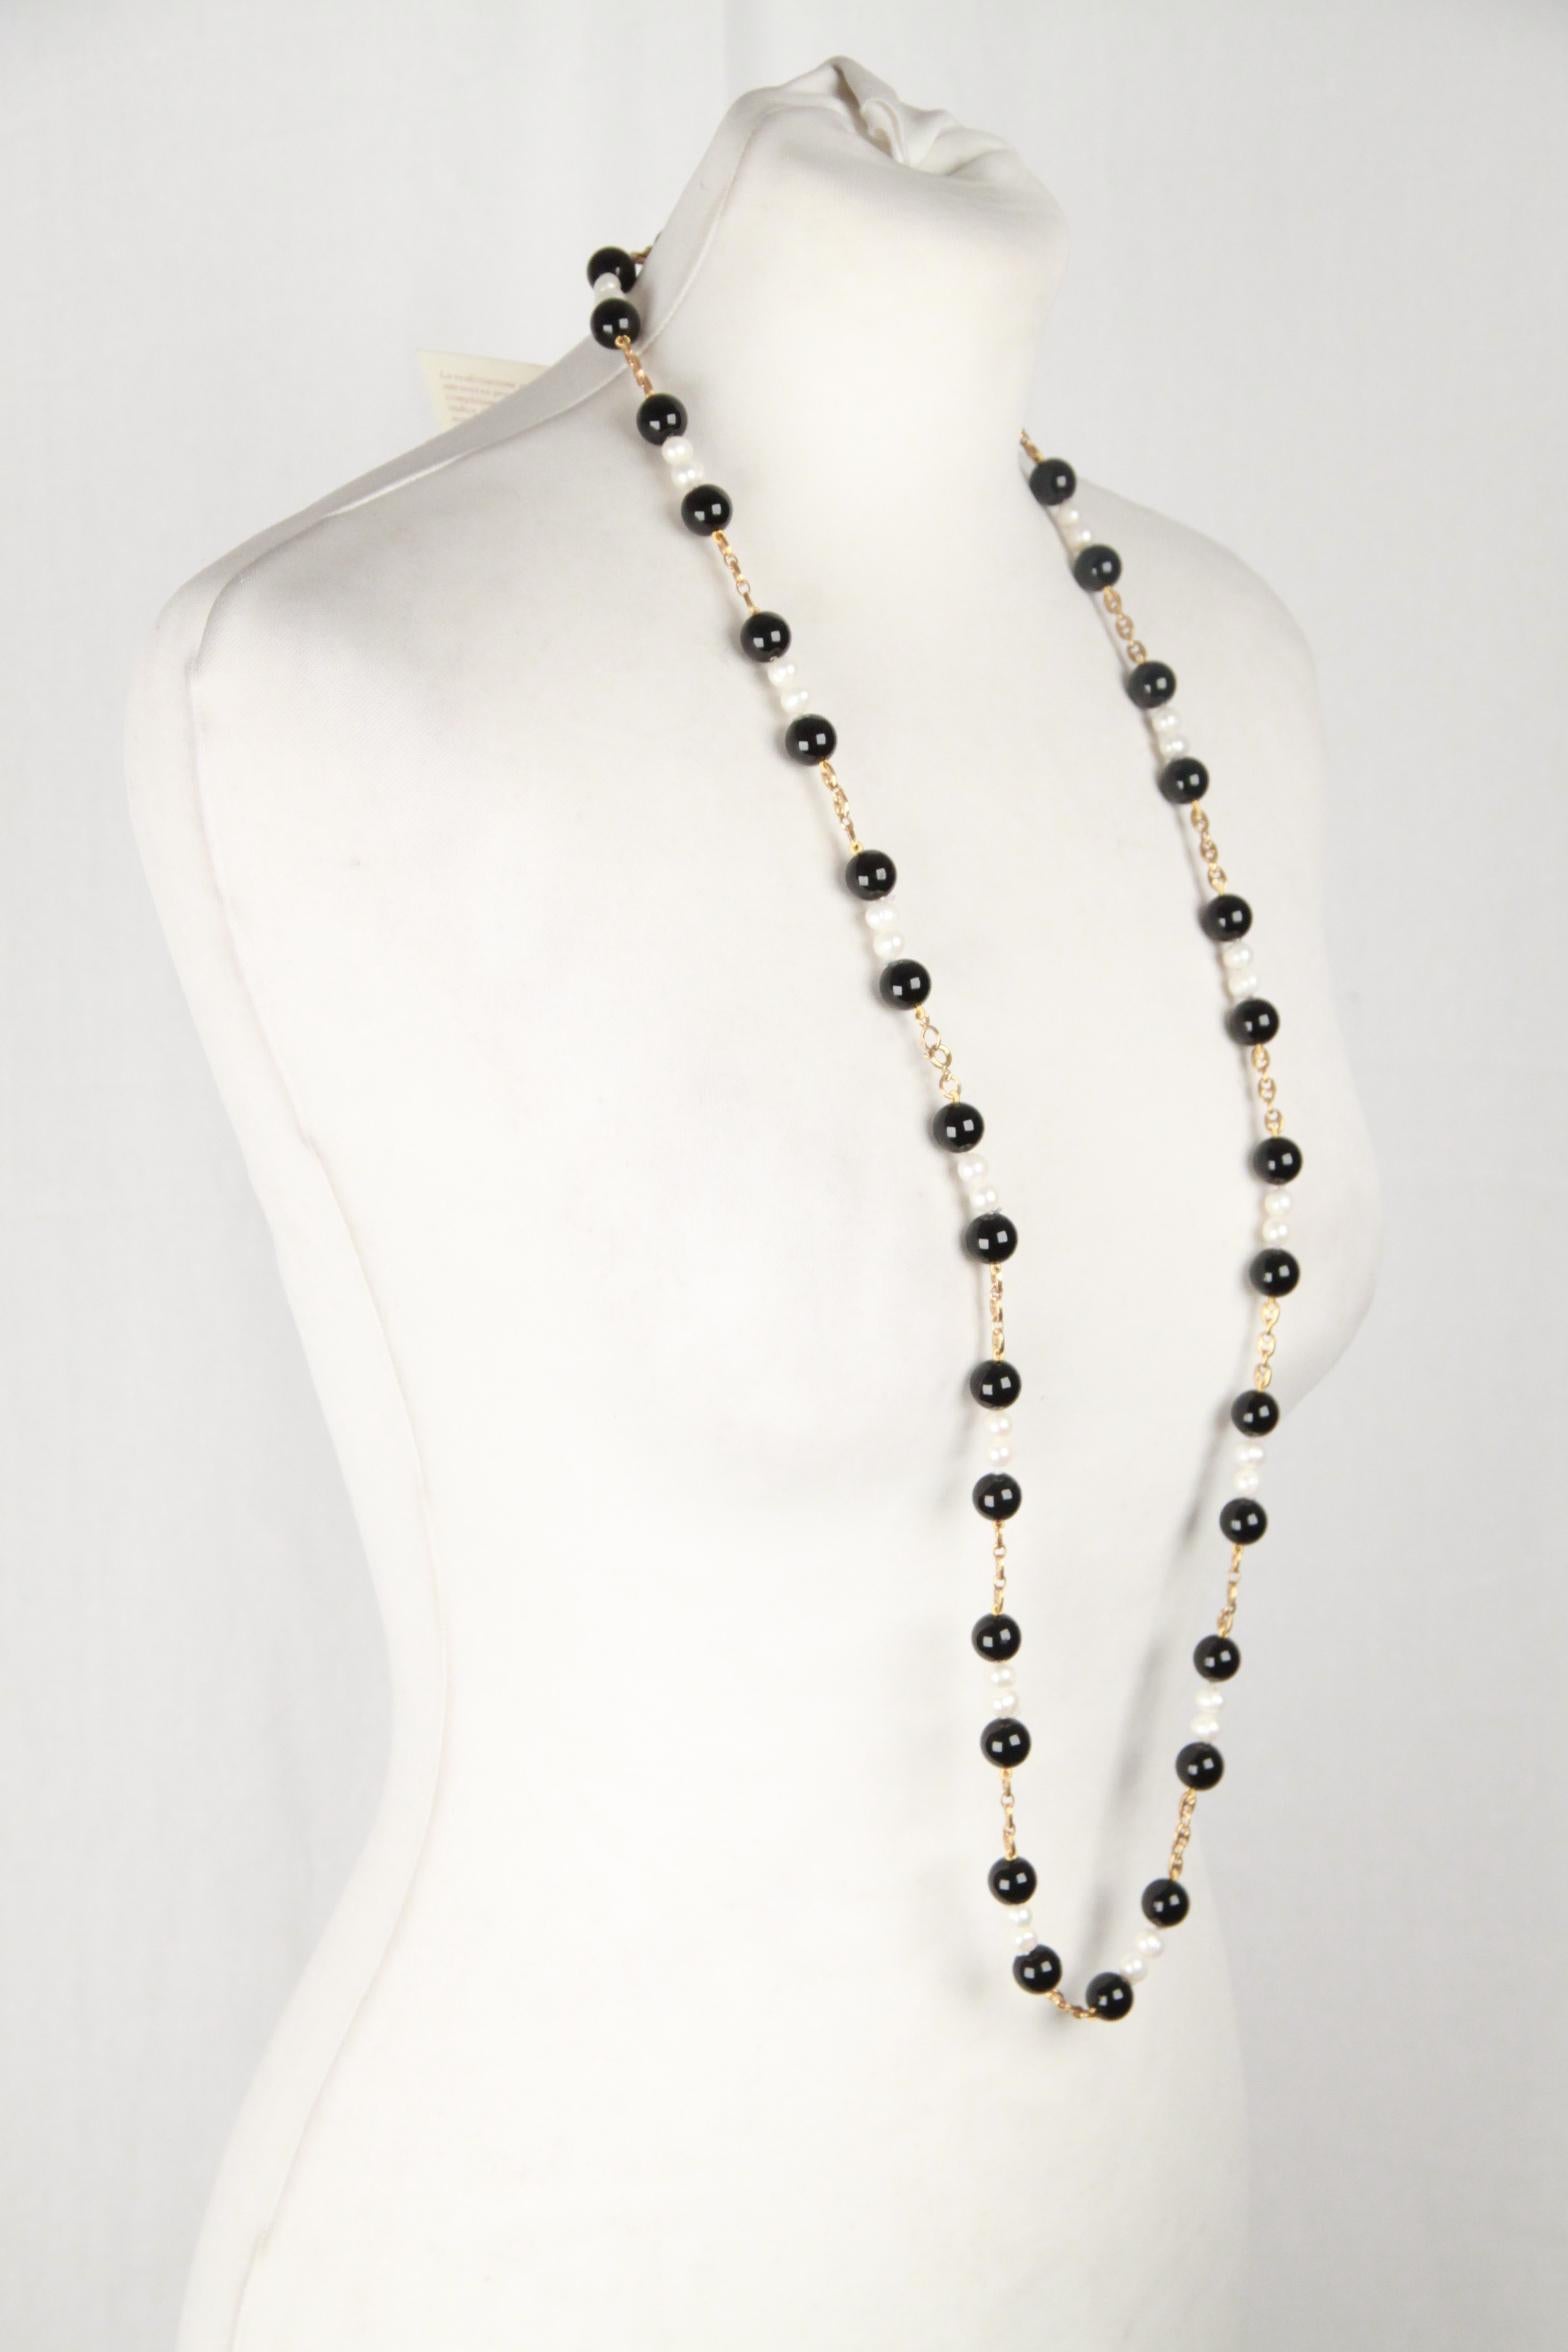 Artisan Handmade in Italy Long Necklace with Black Onyx and Baroque Pearls and Beads